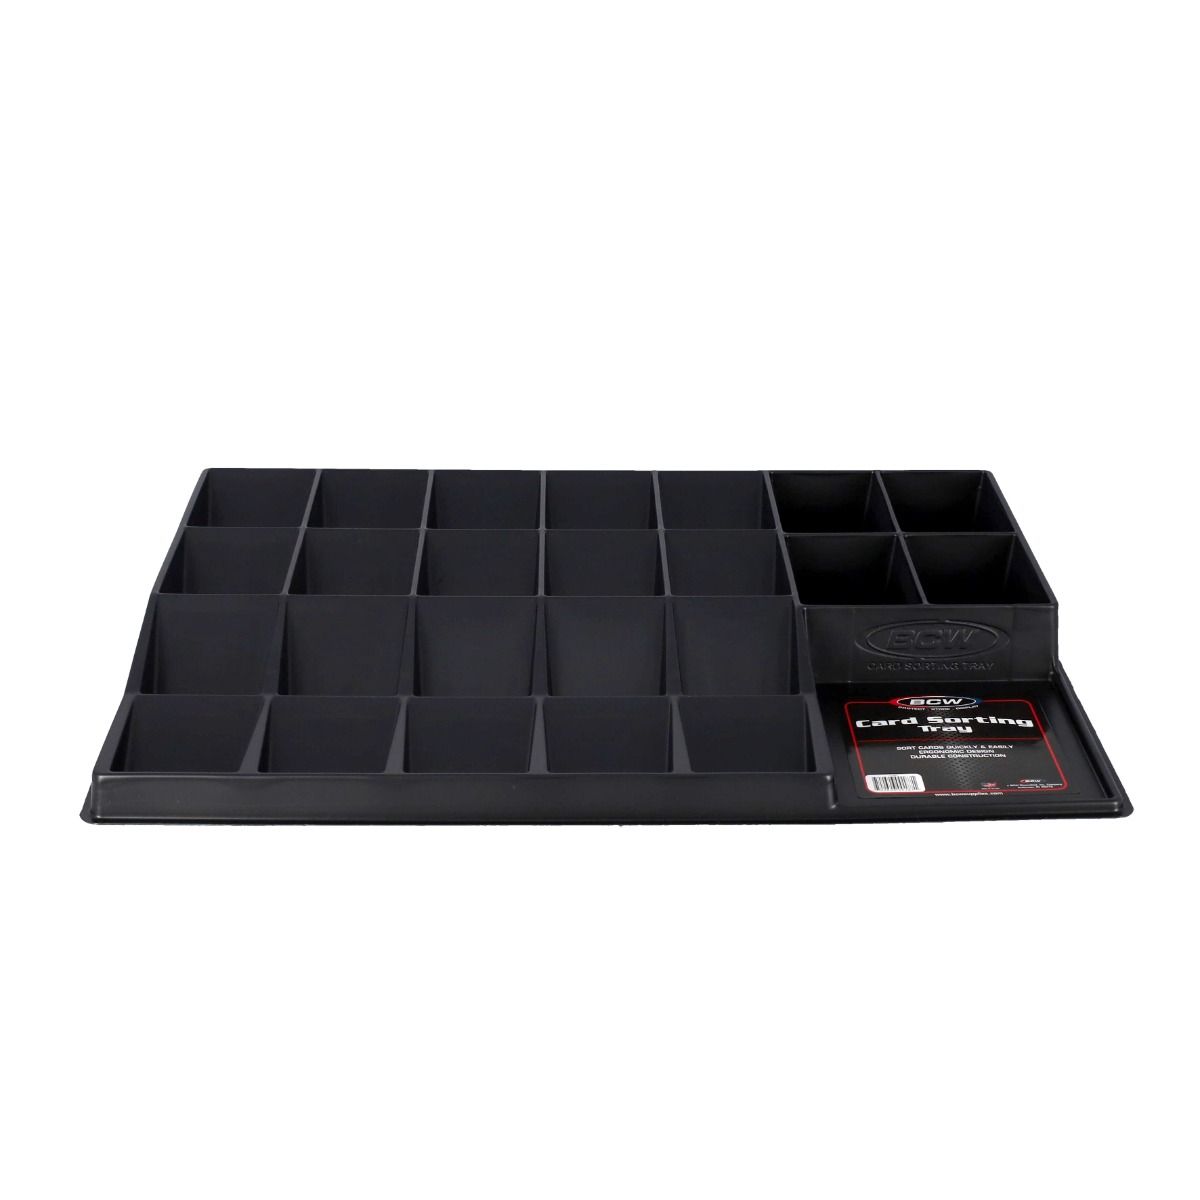 Modular Sorting Tray - BCW - Sort Sports Cards for sale online